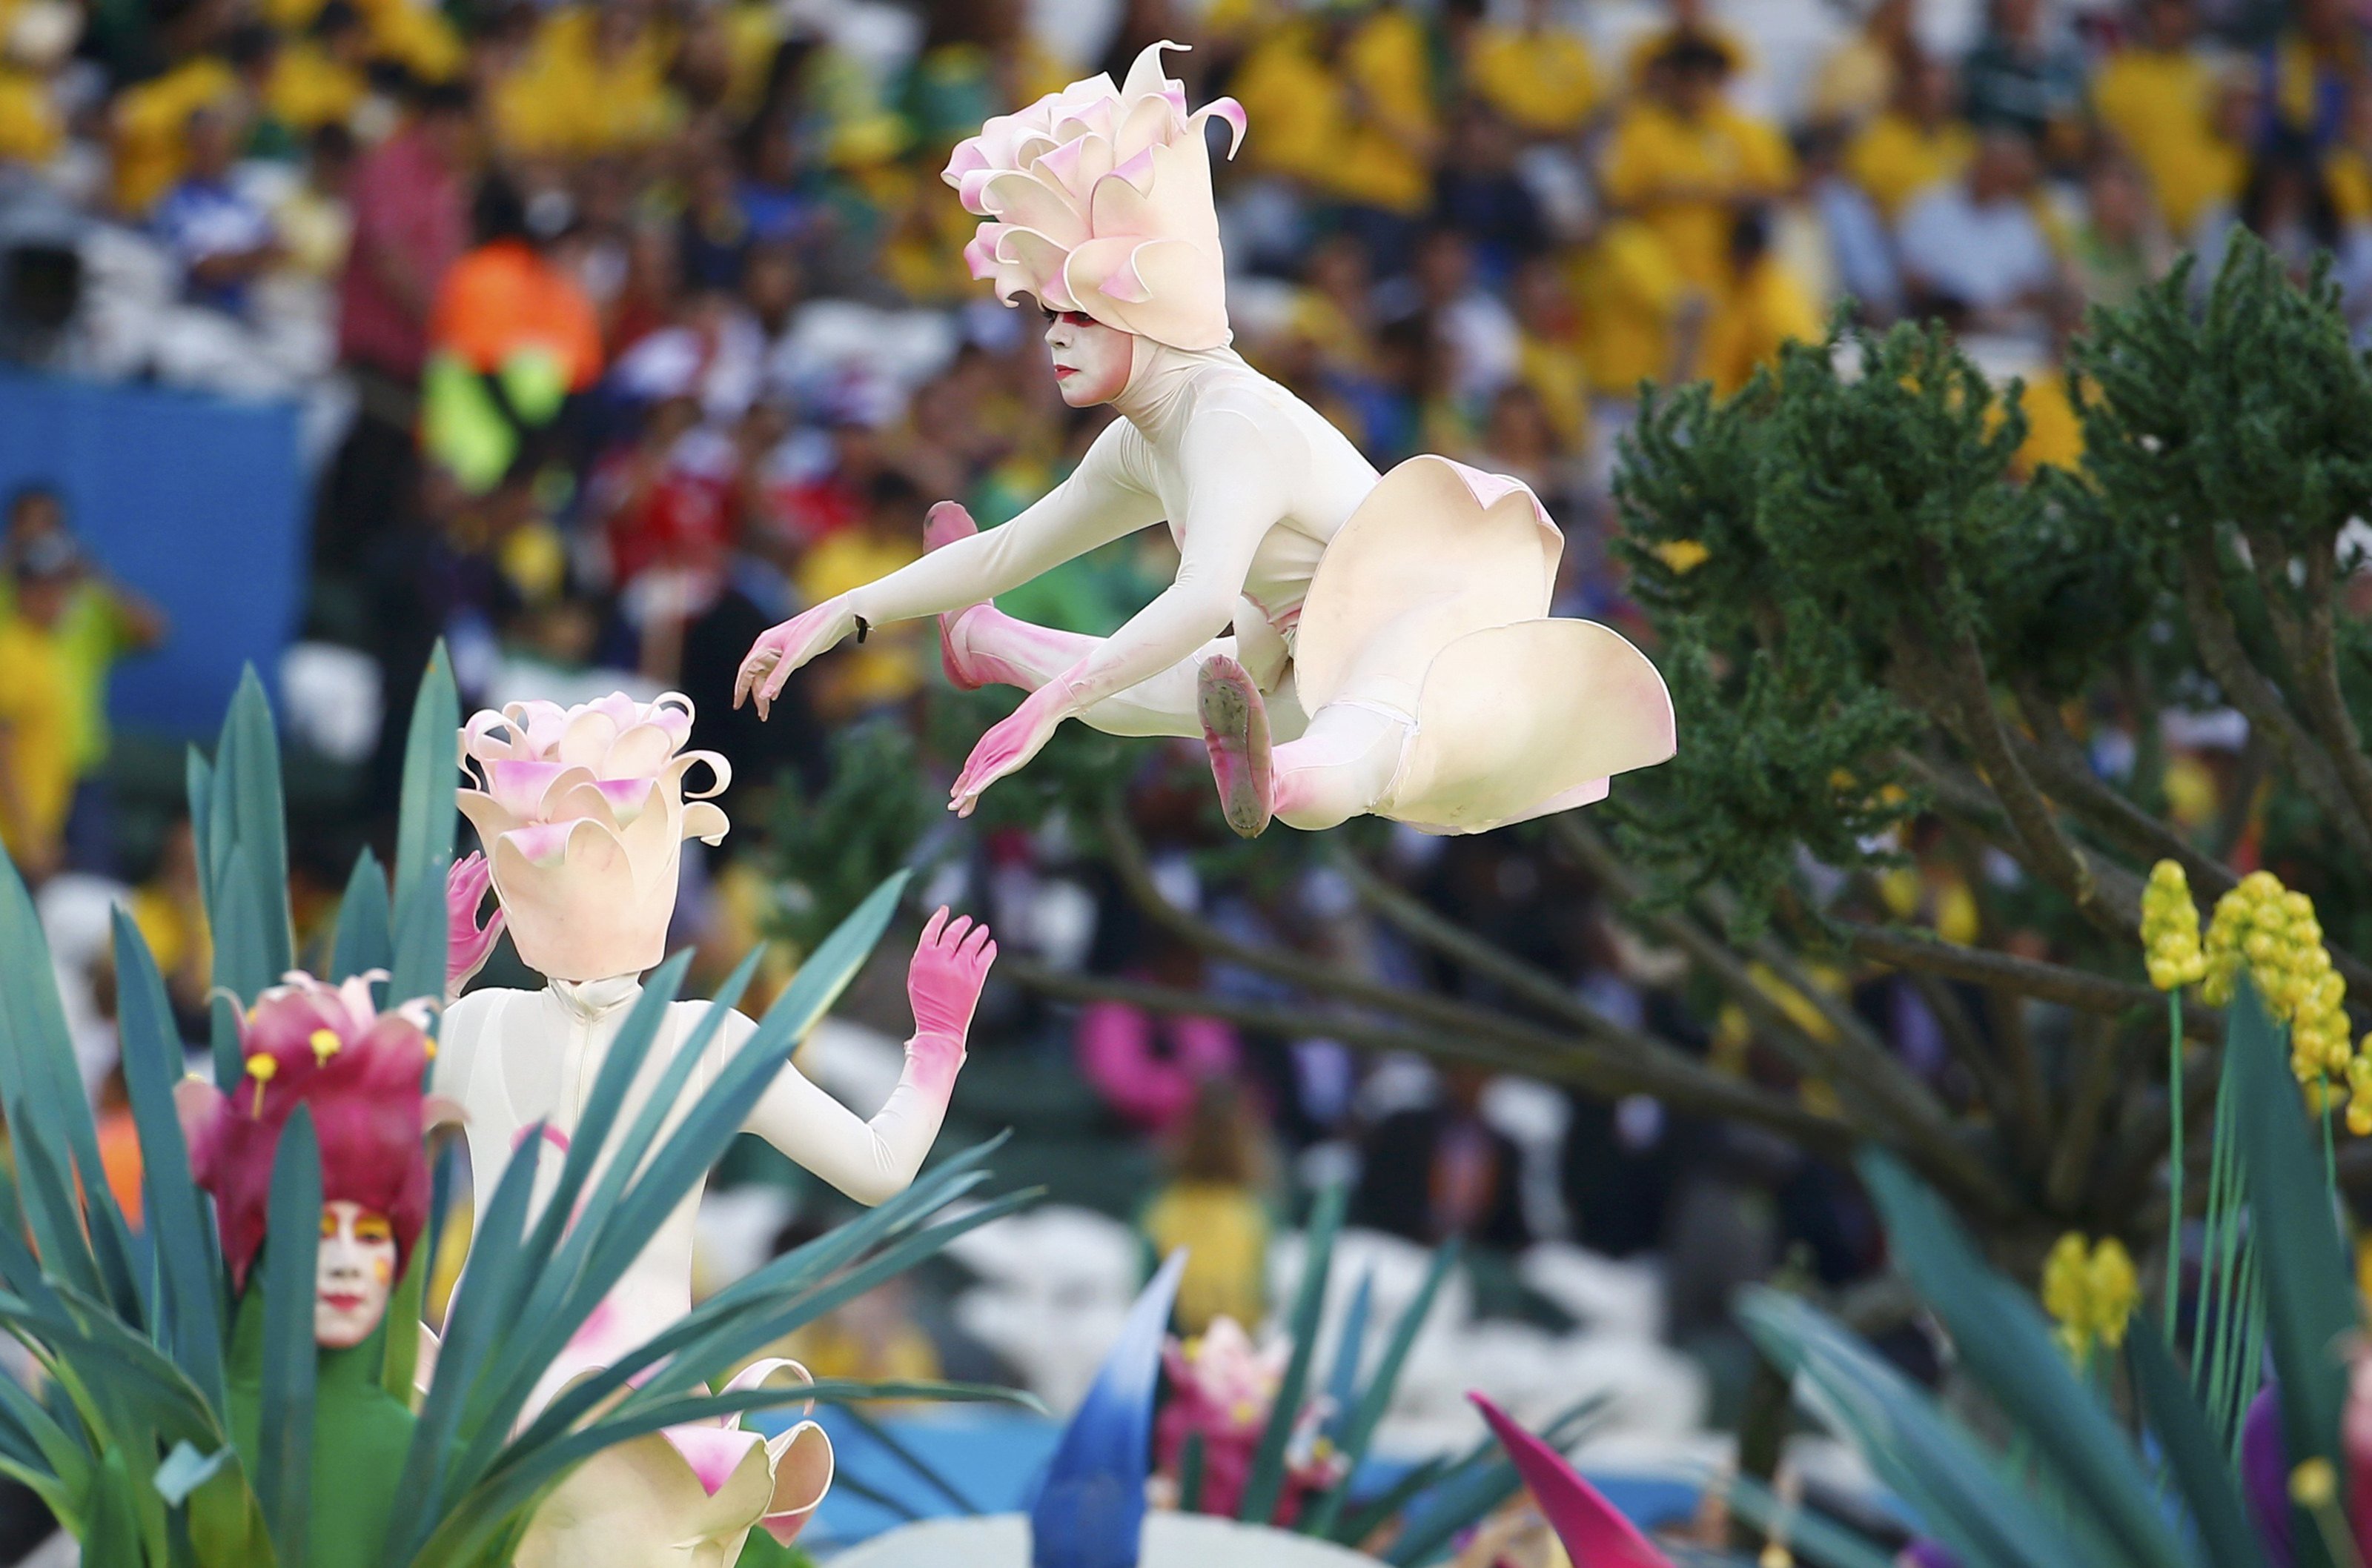 Performers participate in the opening ceremony of the 2014 World Cup at the Corinthians arena in Sao Paulo on June 12, 2014.